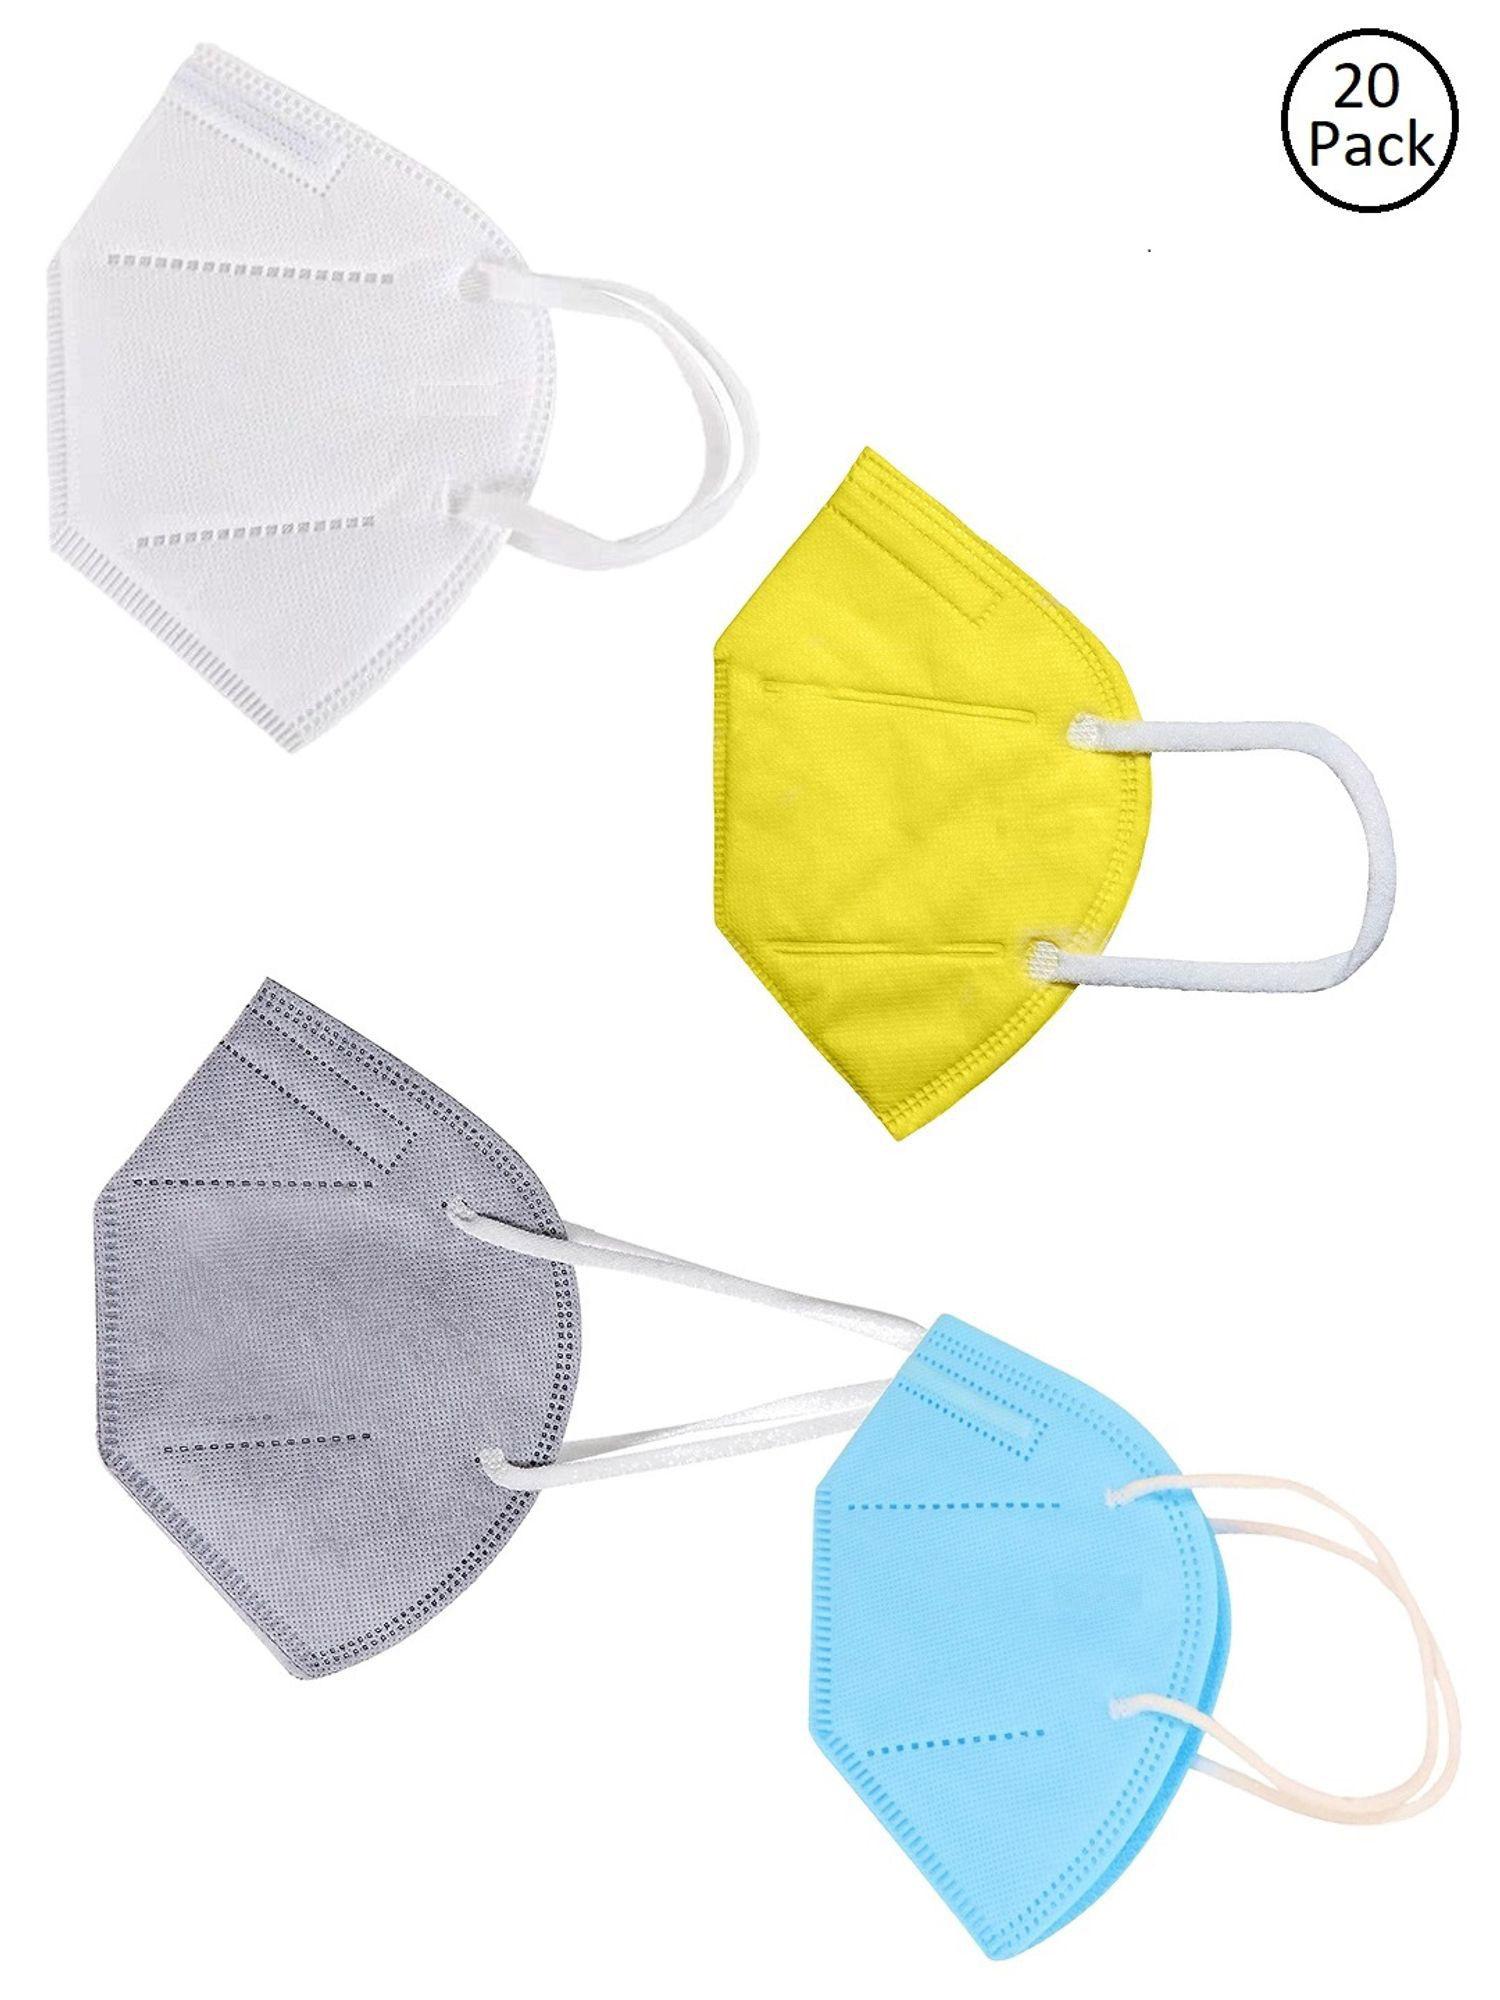 pack of 20 kn95 n95 anti-pollution reusable 5-layer mask